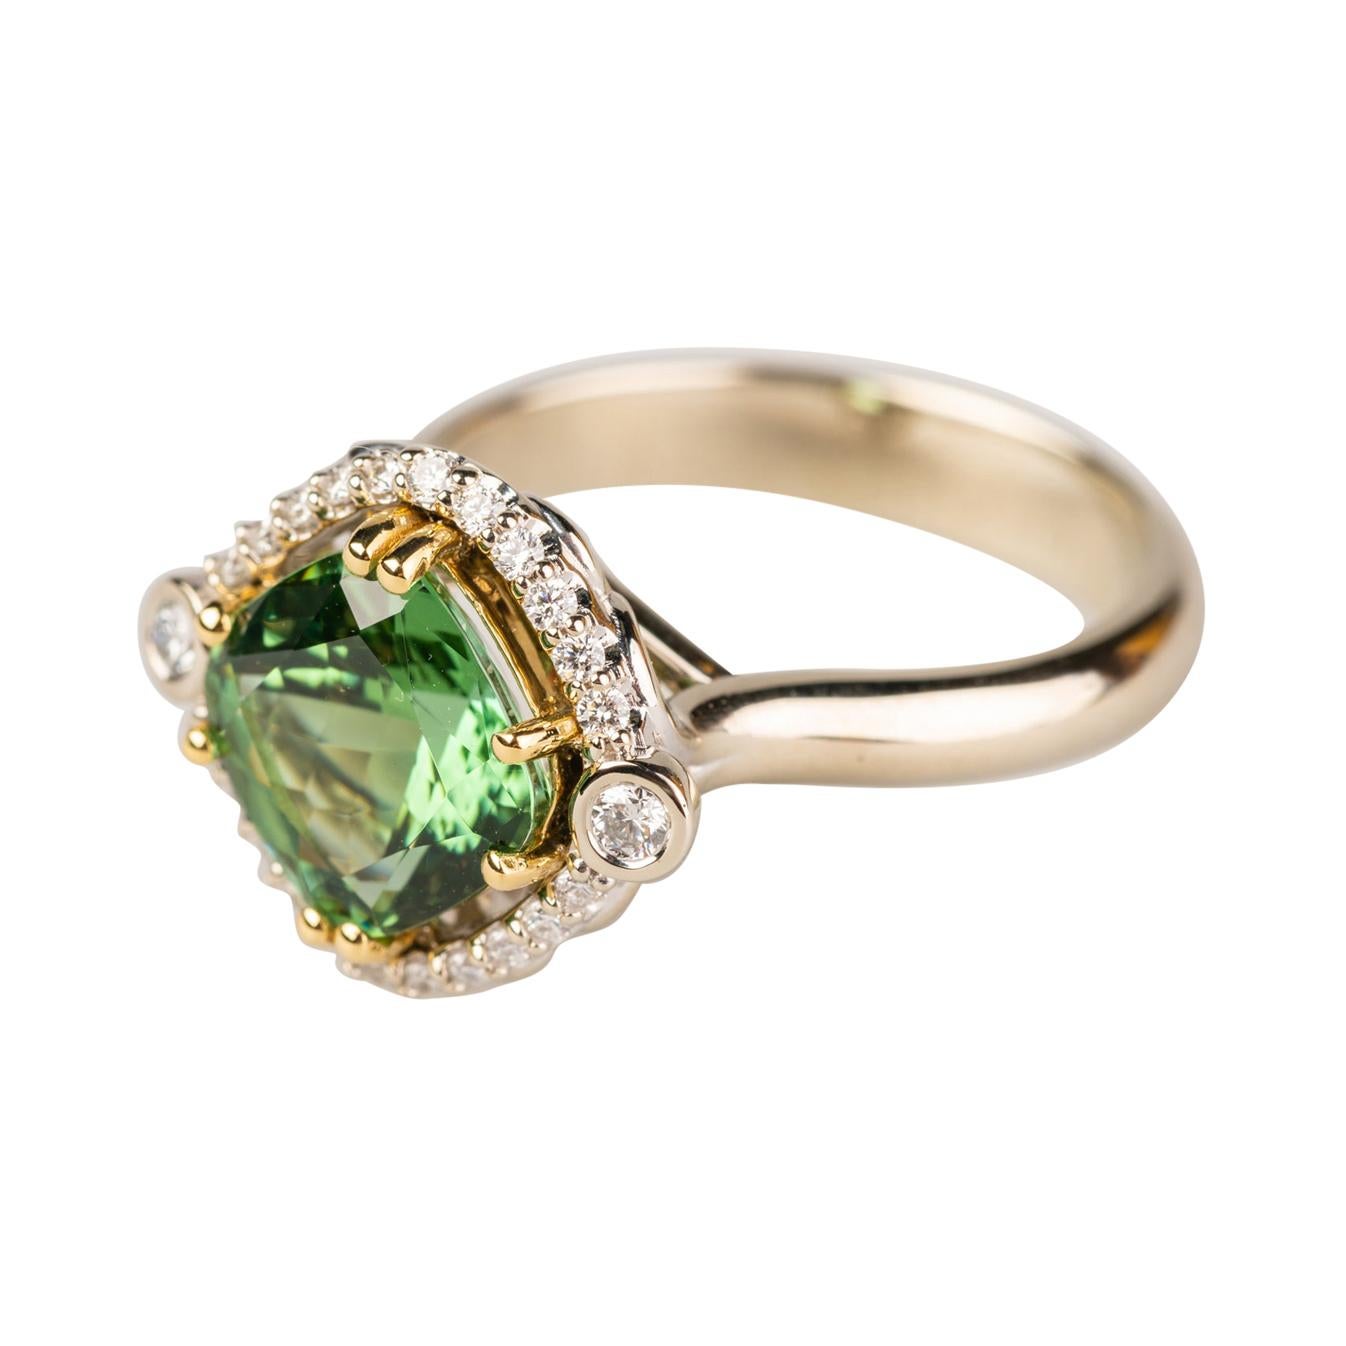 18k White and Yellow Gold 2.81 Carat Green Tourmaline Ring with a Diamond Halo For Sale